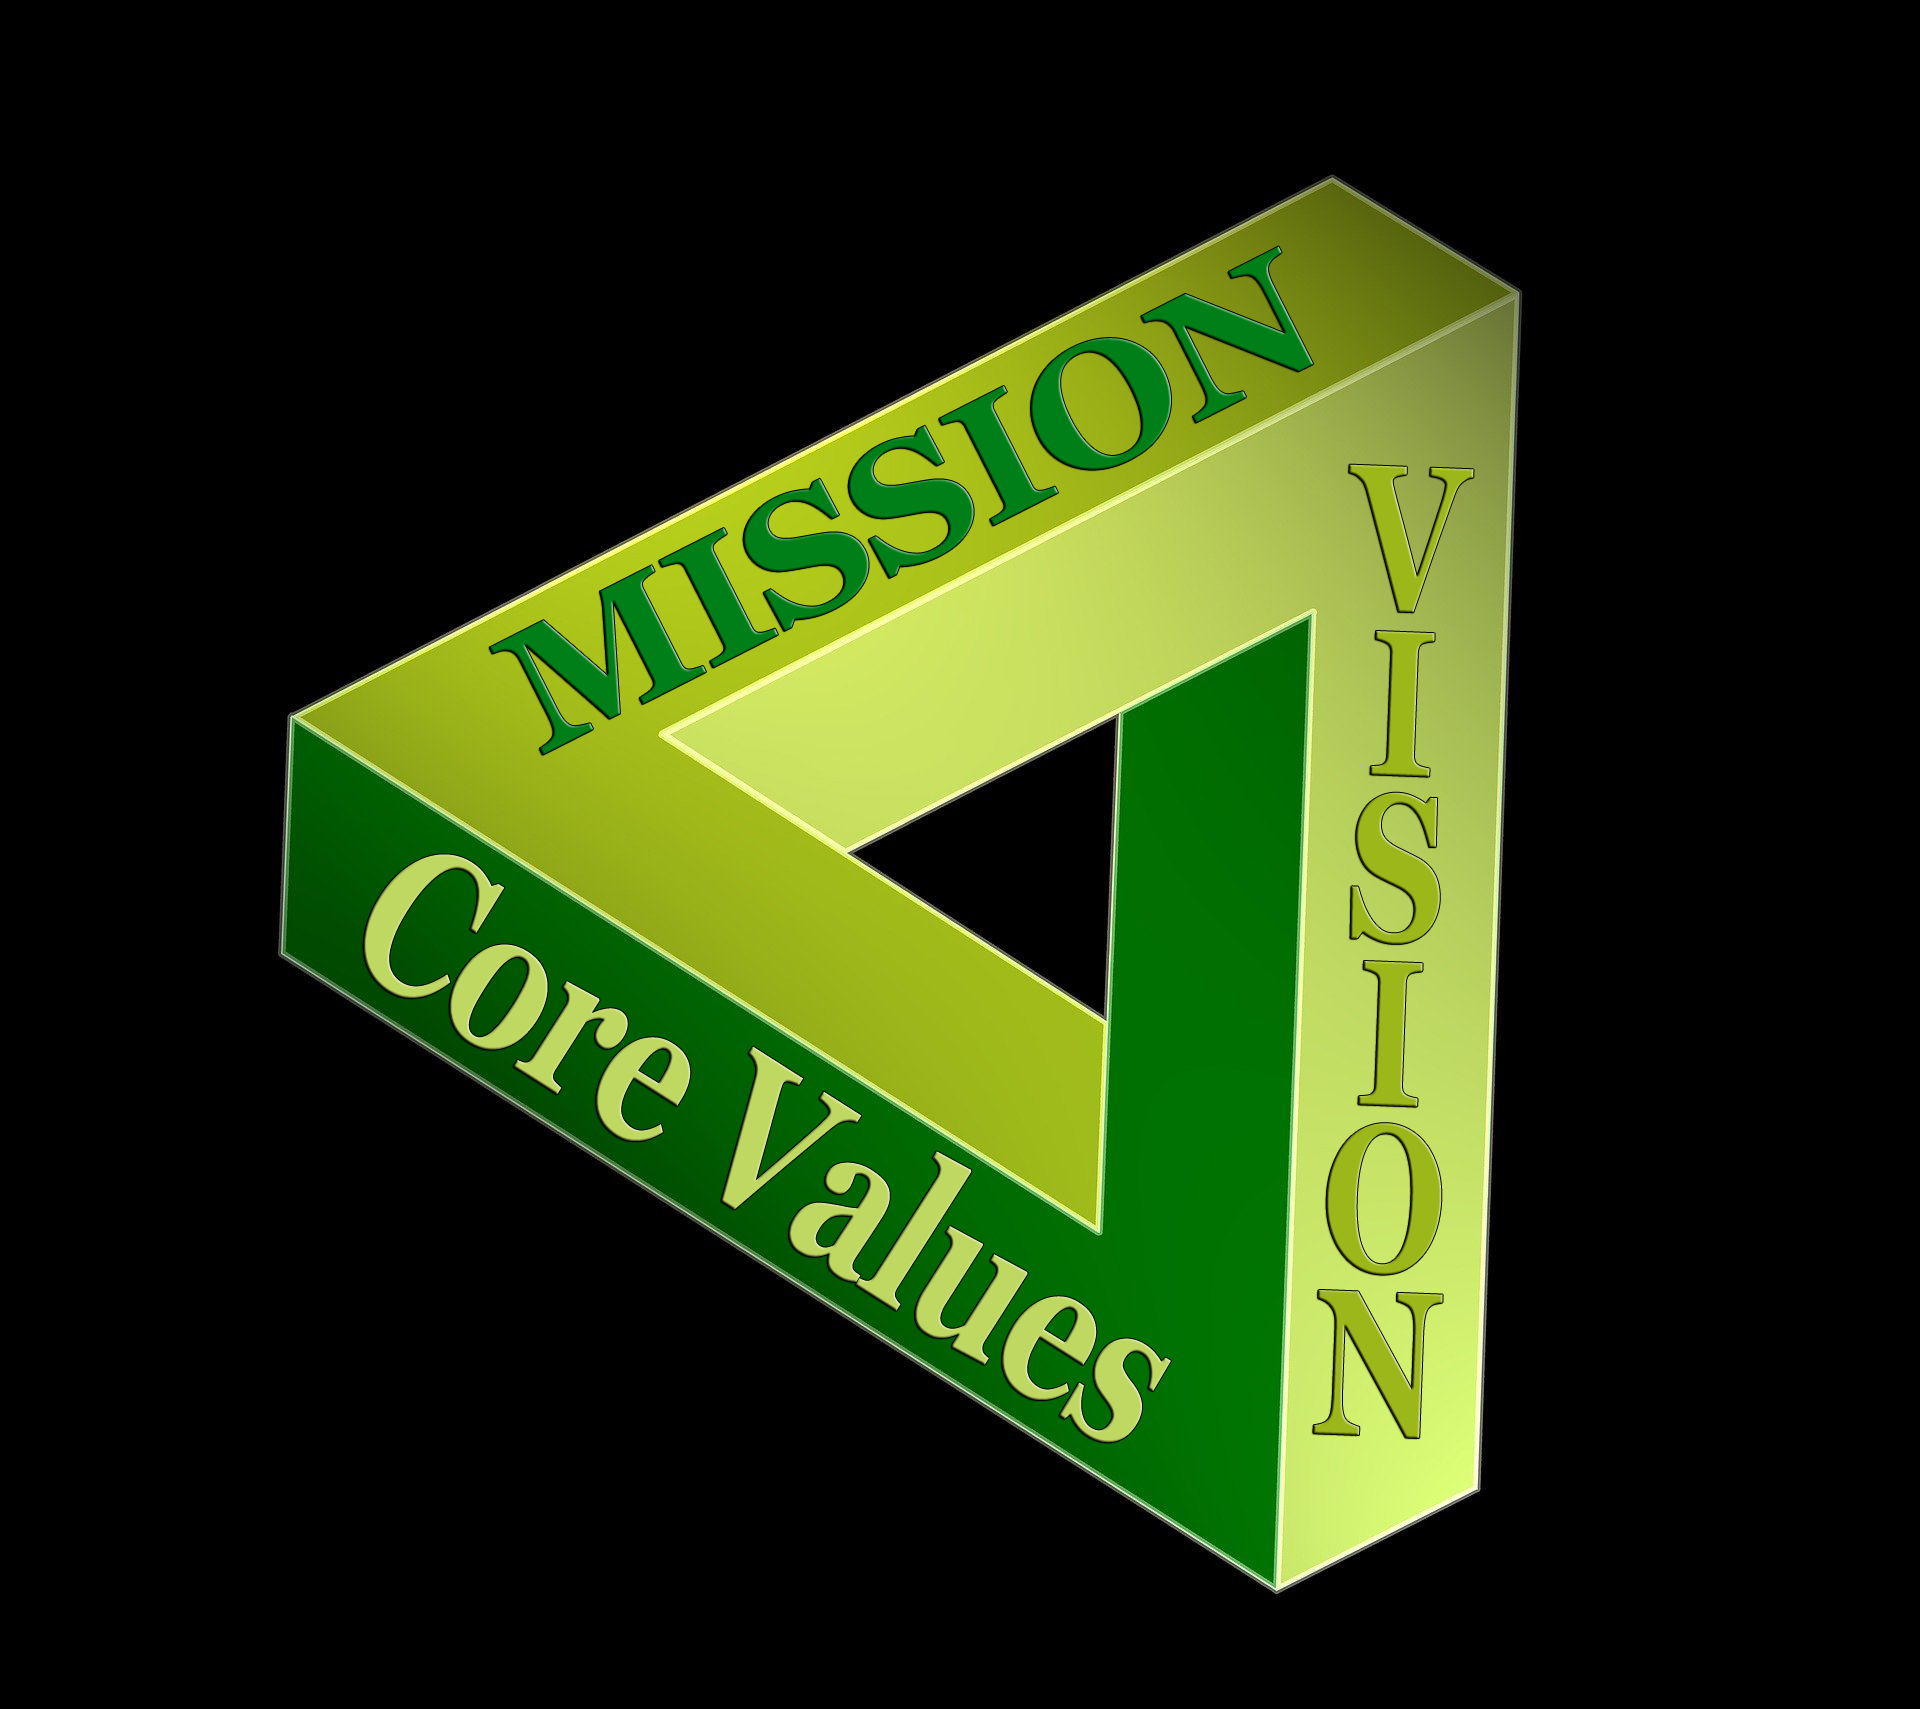 Core Values into mission and vision